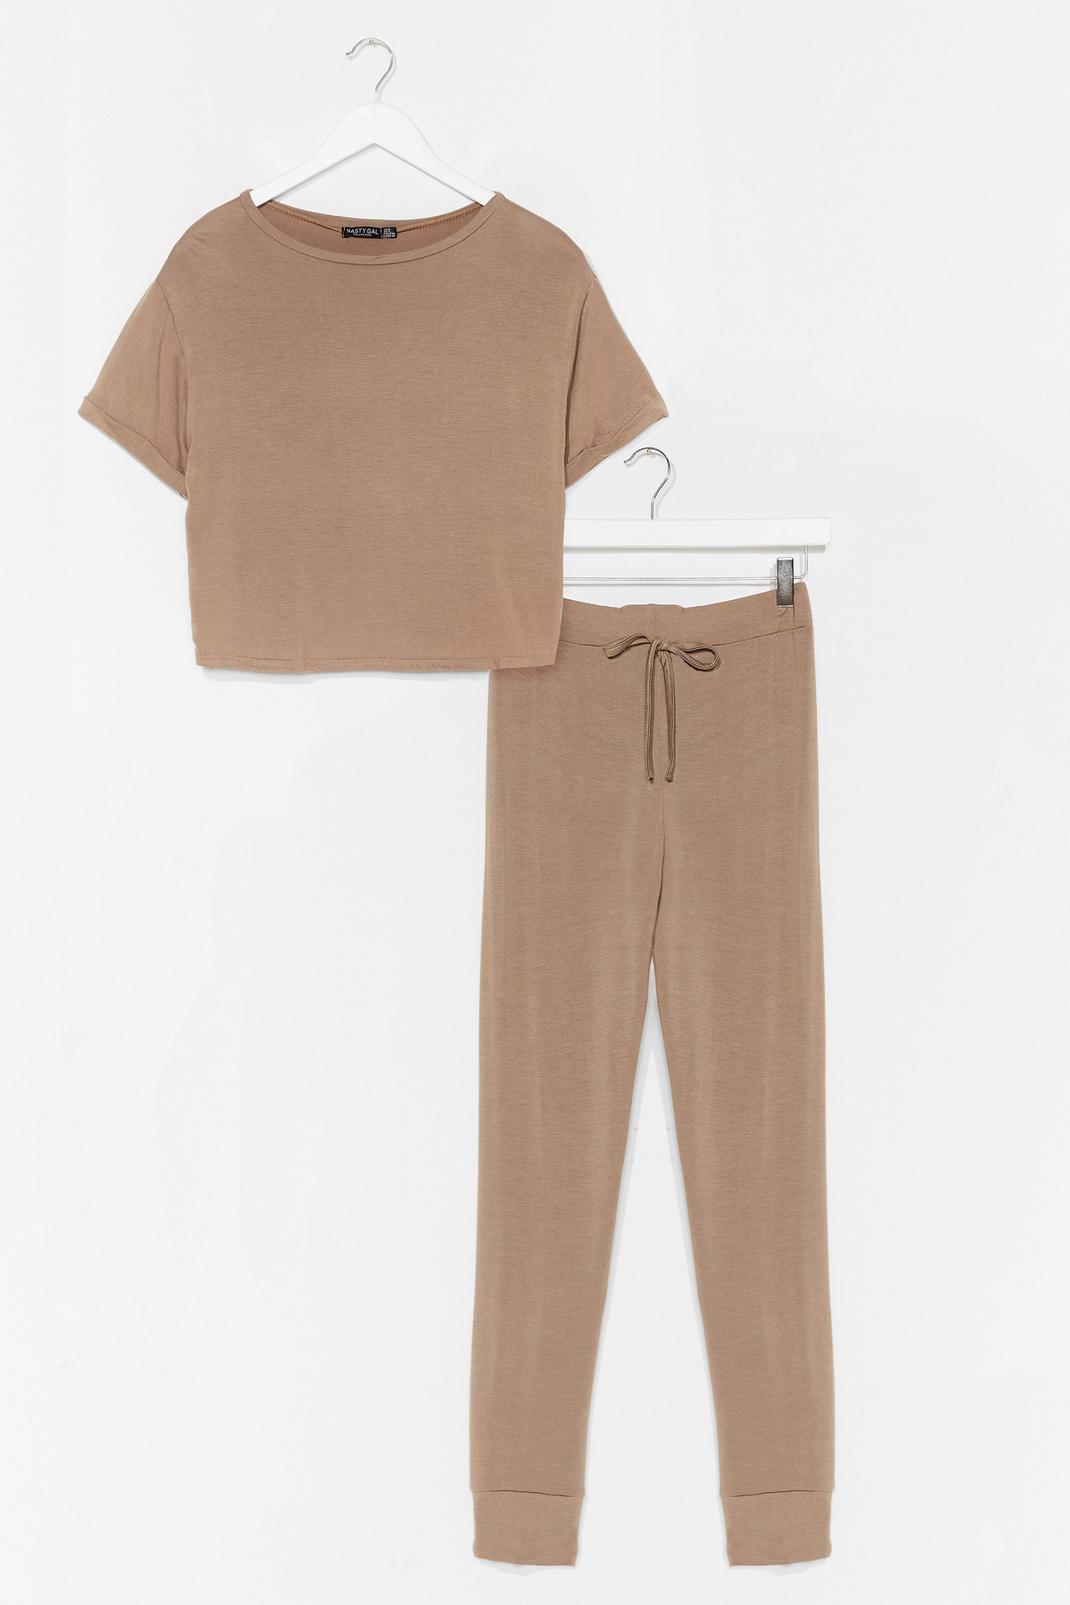 Sand T-Shirt and Fitted Joggers Pyjama Set image number 1